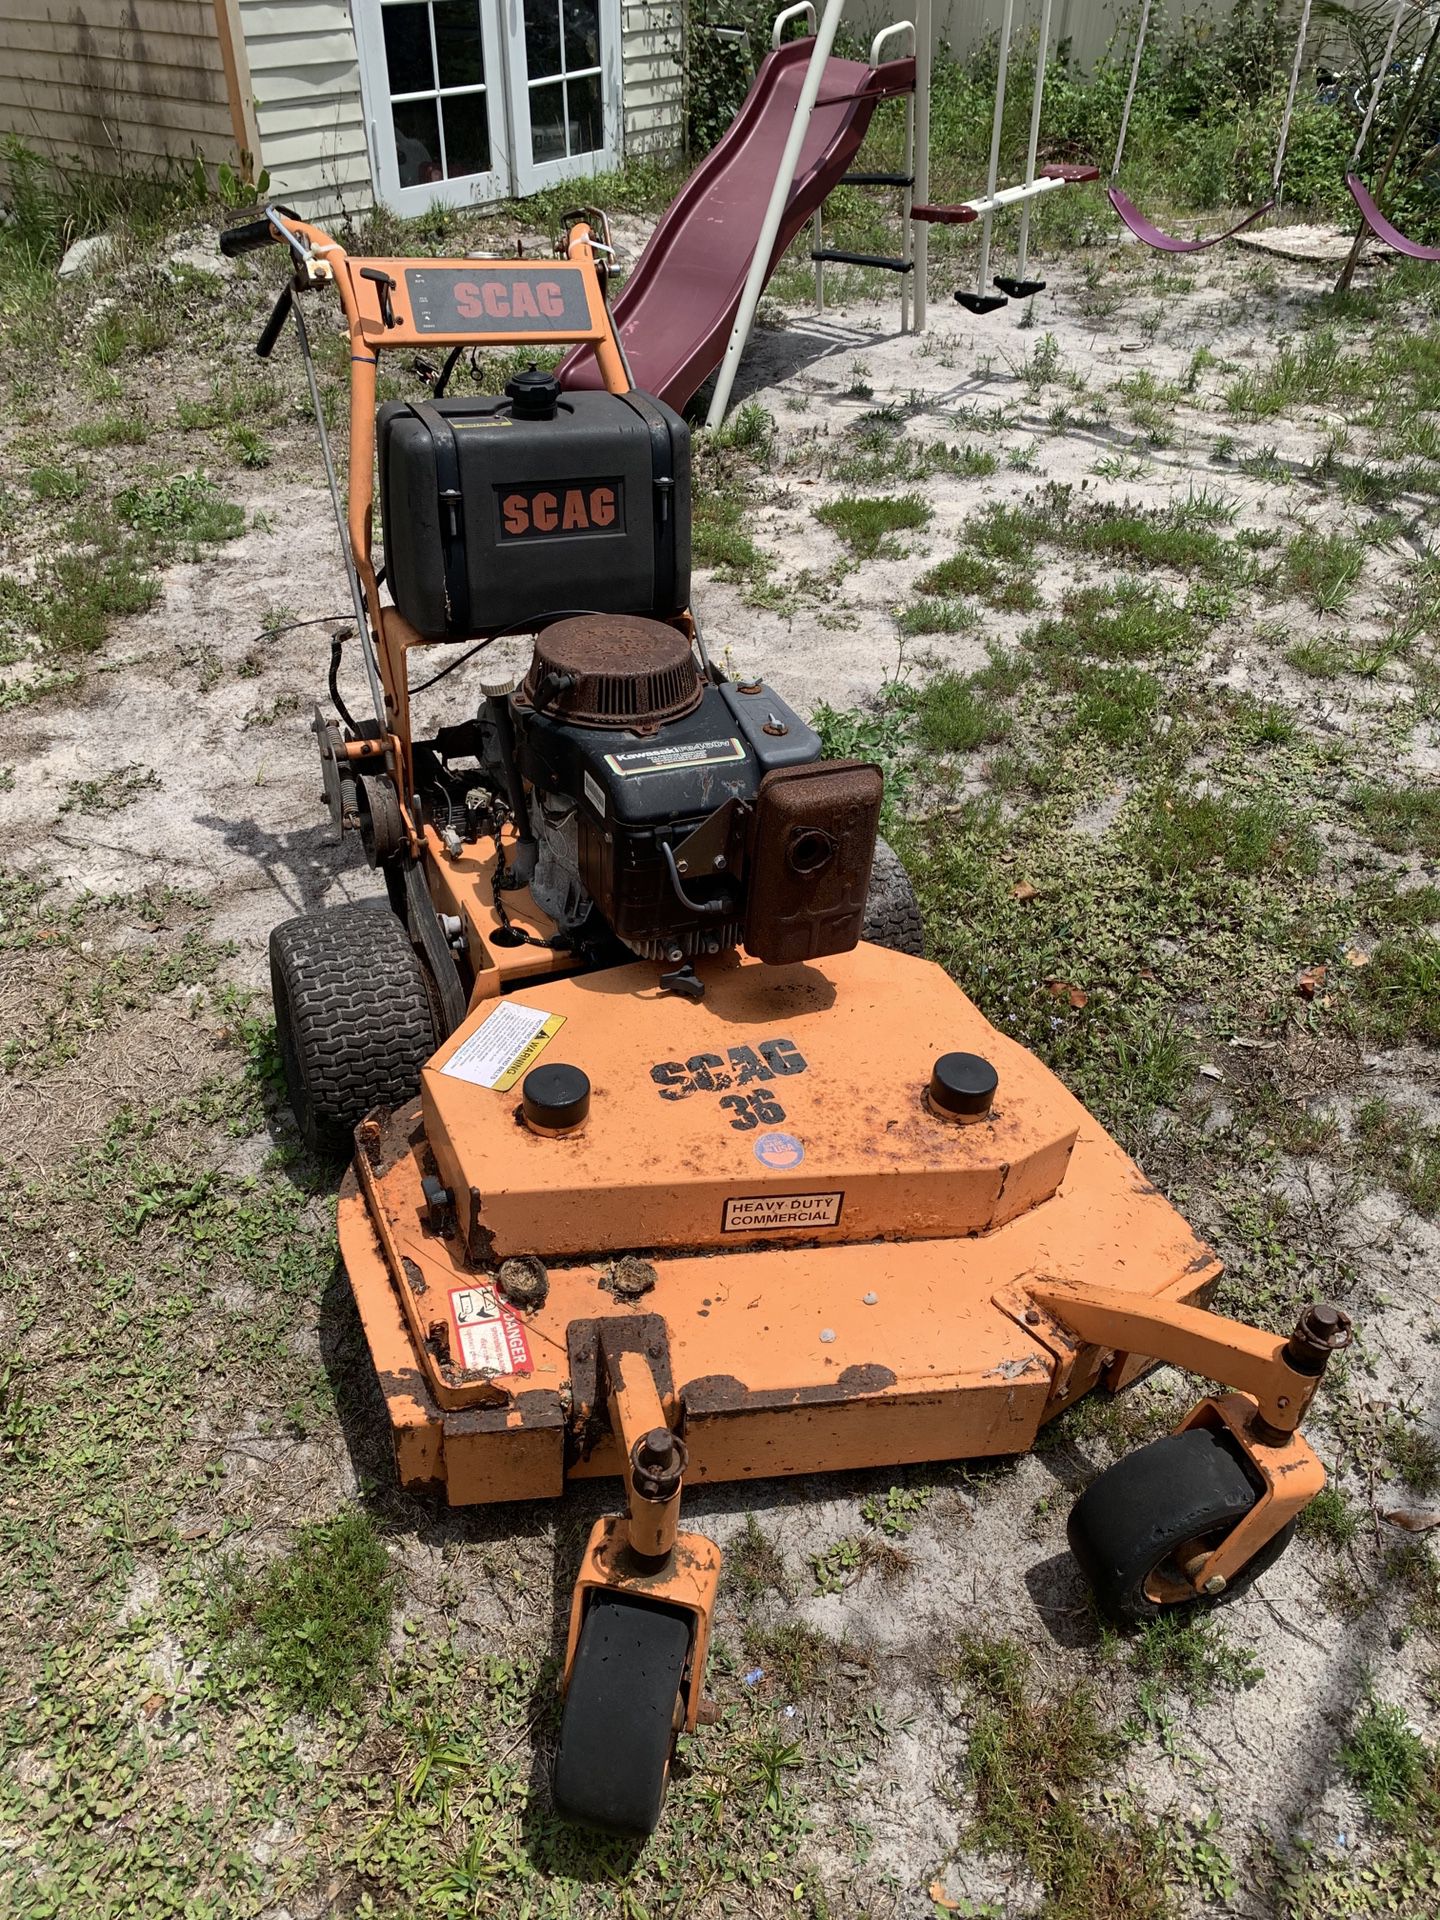 Scag 36 commercial lawnmower